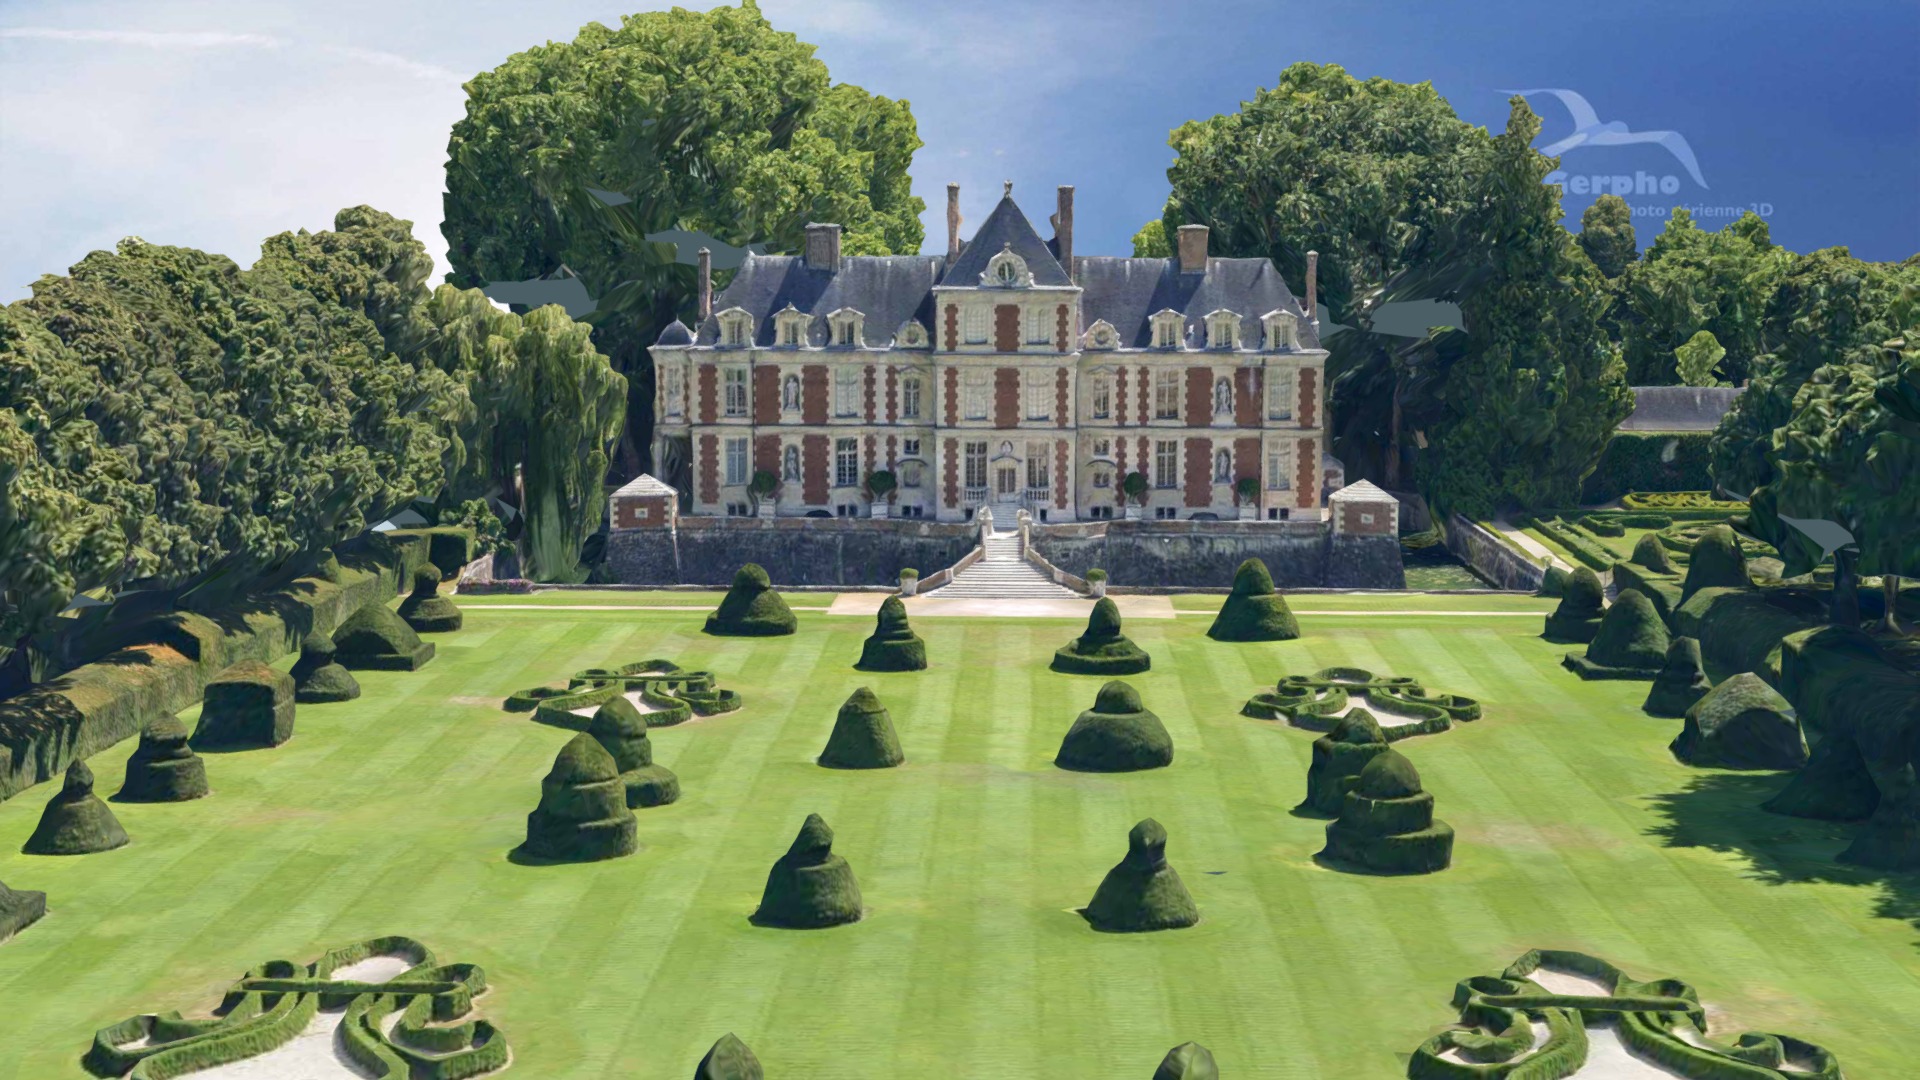 3D model Chateau de Wideville - This is a 3D model of the Chateau de Wideville. The 3D model is about a large building with many trees in front of it.